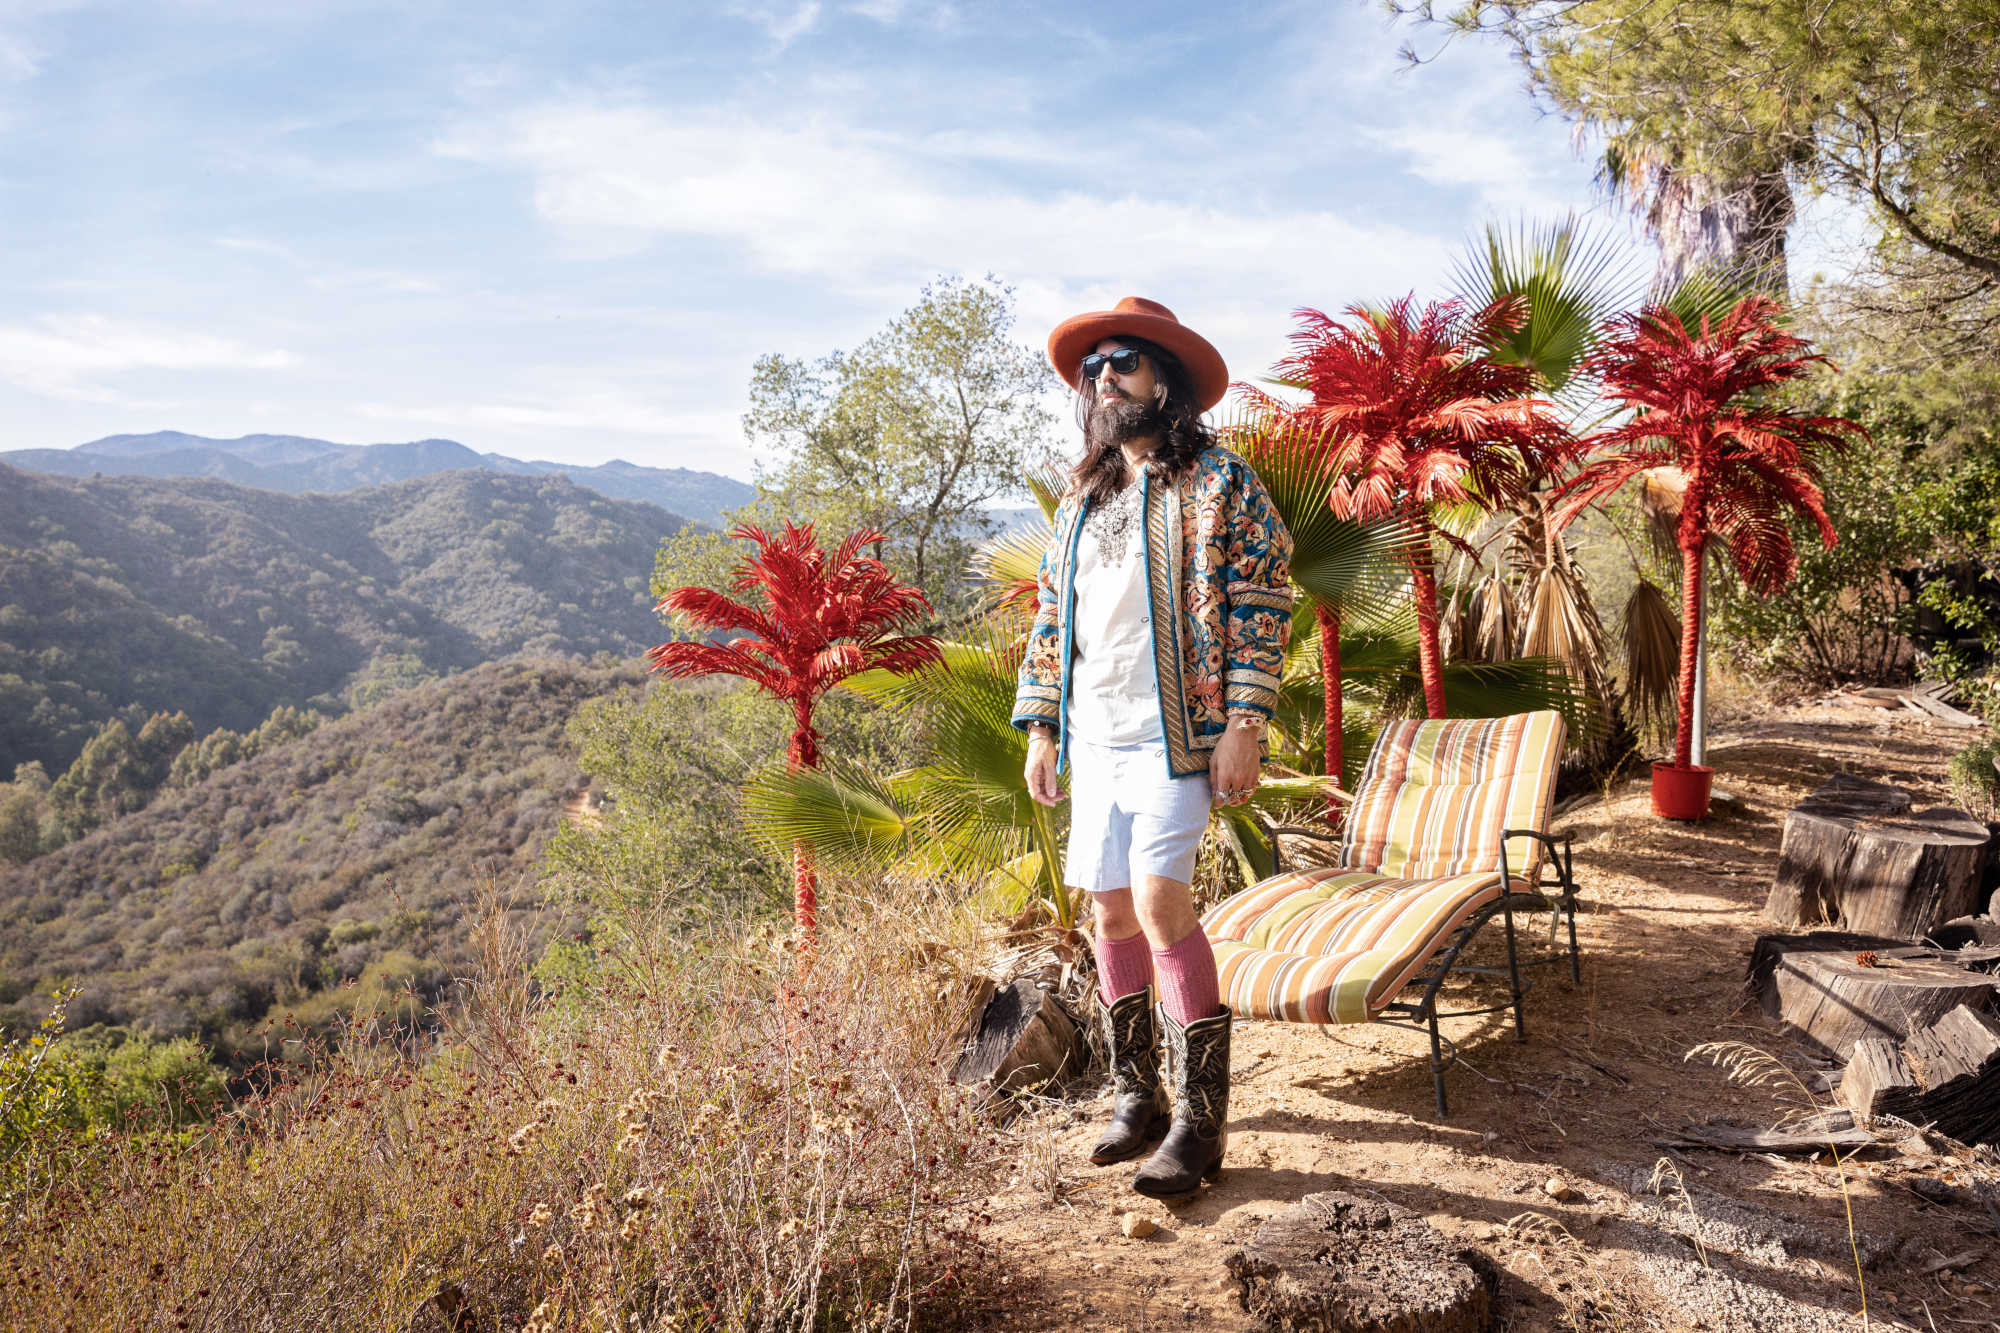 Alessandro Michele, overlooking Sullivan Canyon Park, Los Angeles, photographed for Vogue, May 2019. Photograph by Tierney Gearon